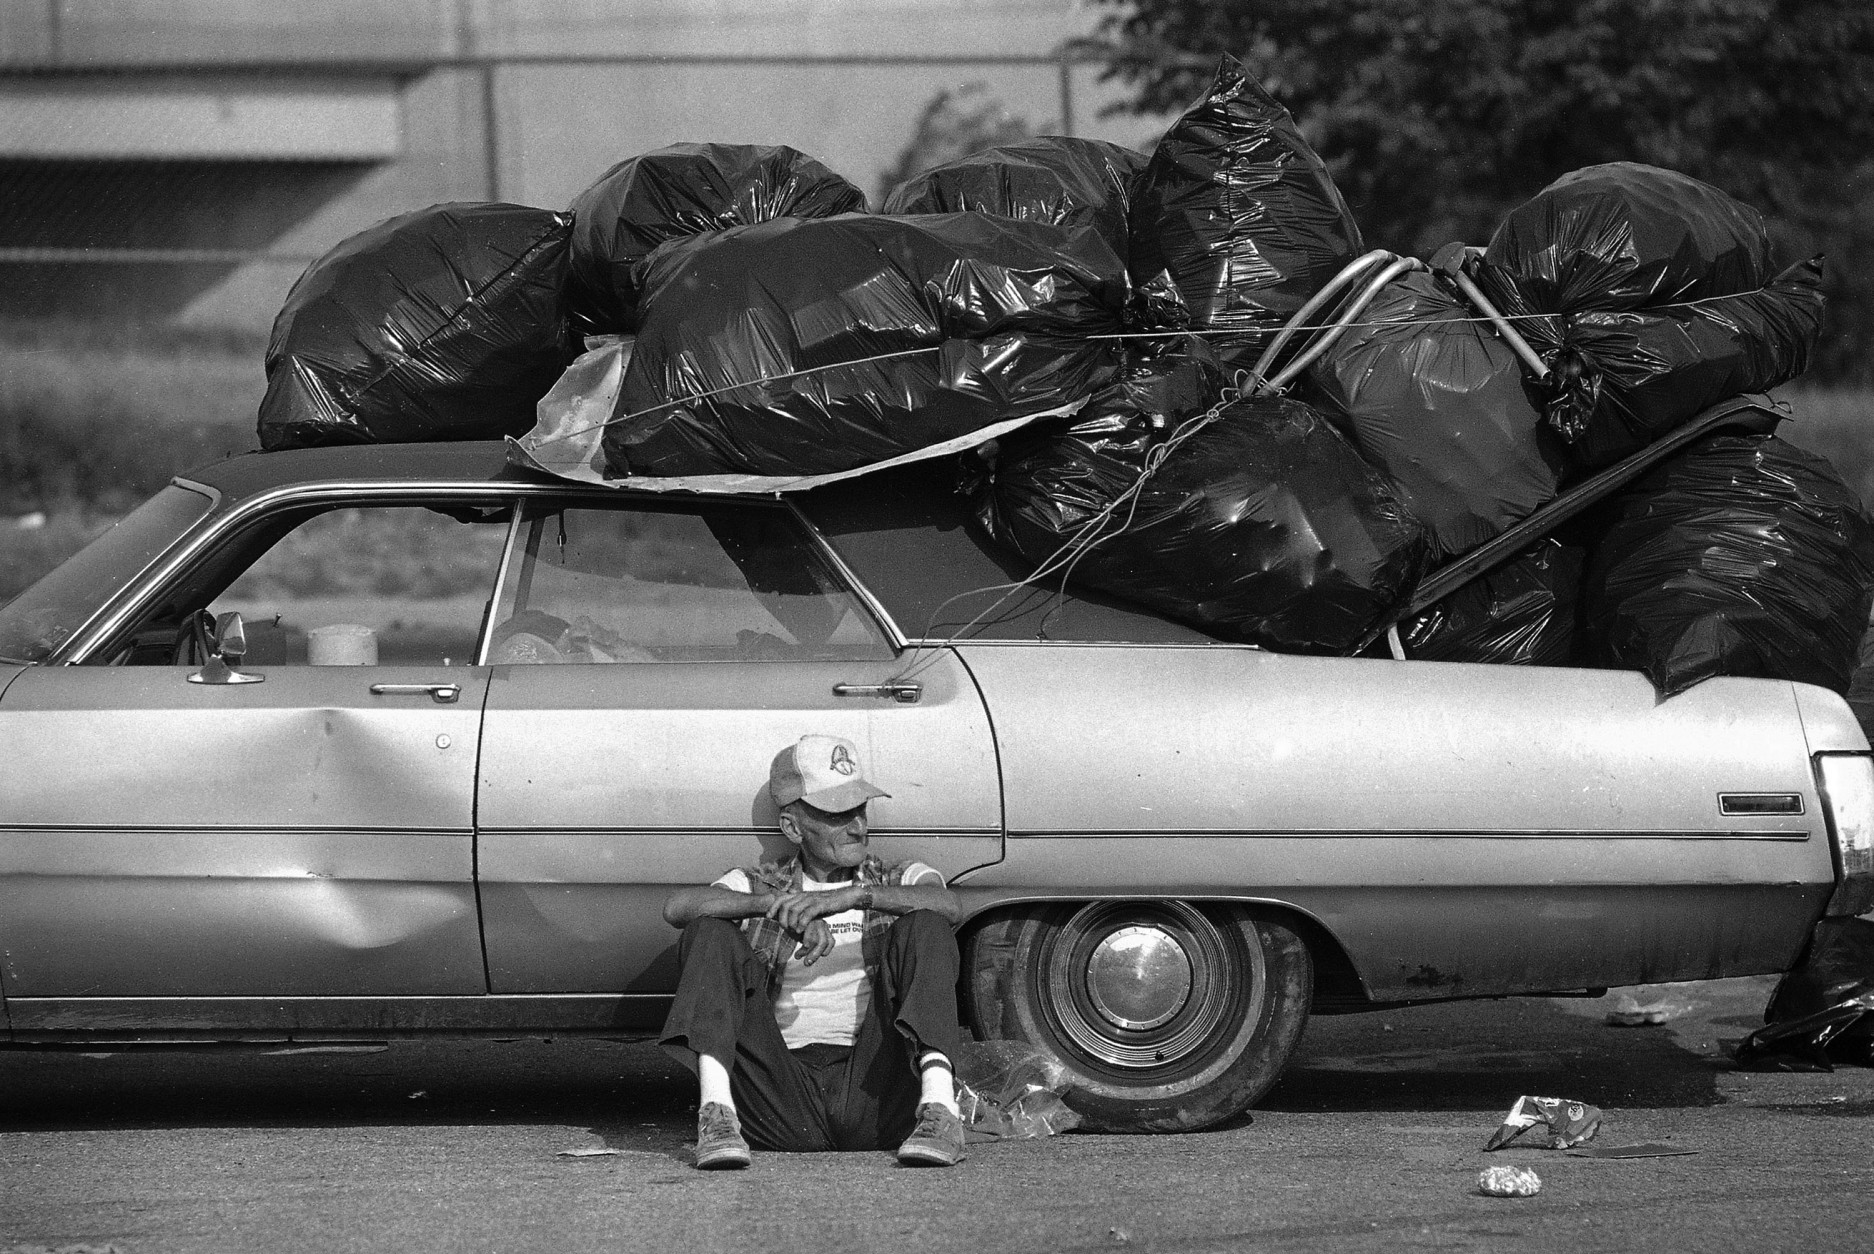 His car heeped with bags filled with aluminum cans, Charles Miller of Philadelphia takes a break from collecting the cans in the parking lots outside Philadelphia's JFK Stadium Sunday morning, July 14, 1985.  Parking lots surrounding the stadium were scattered with bottles and cans and garbage following Saturday's Live Aid concert. (AP Photo/Amy Sancetta)